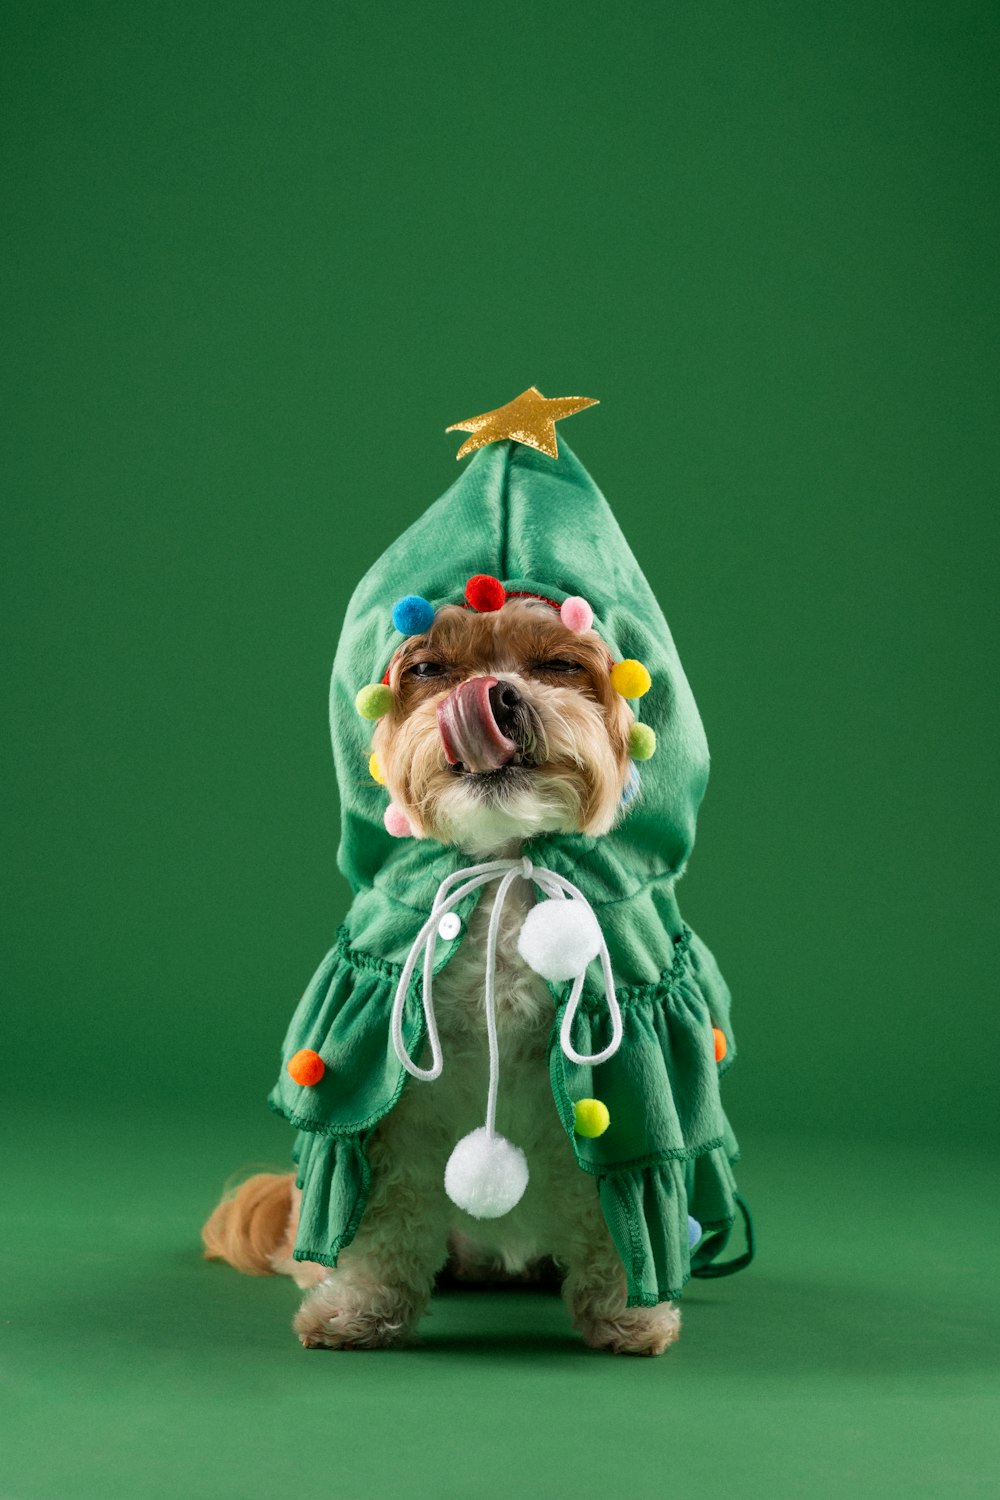 a small dog dressed in a green costume